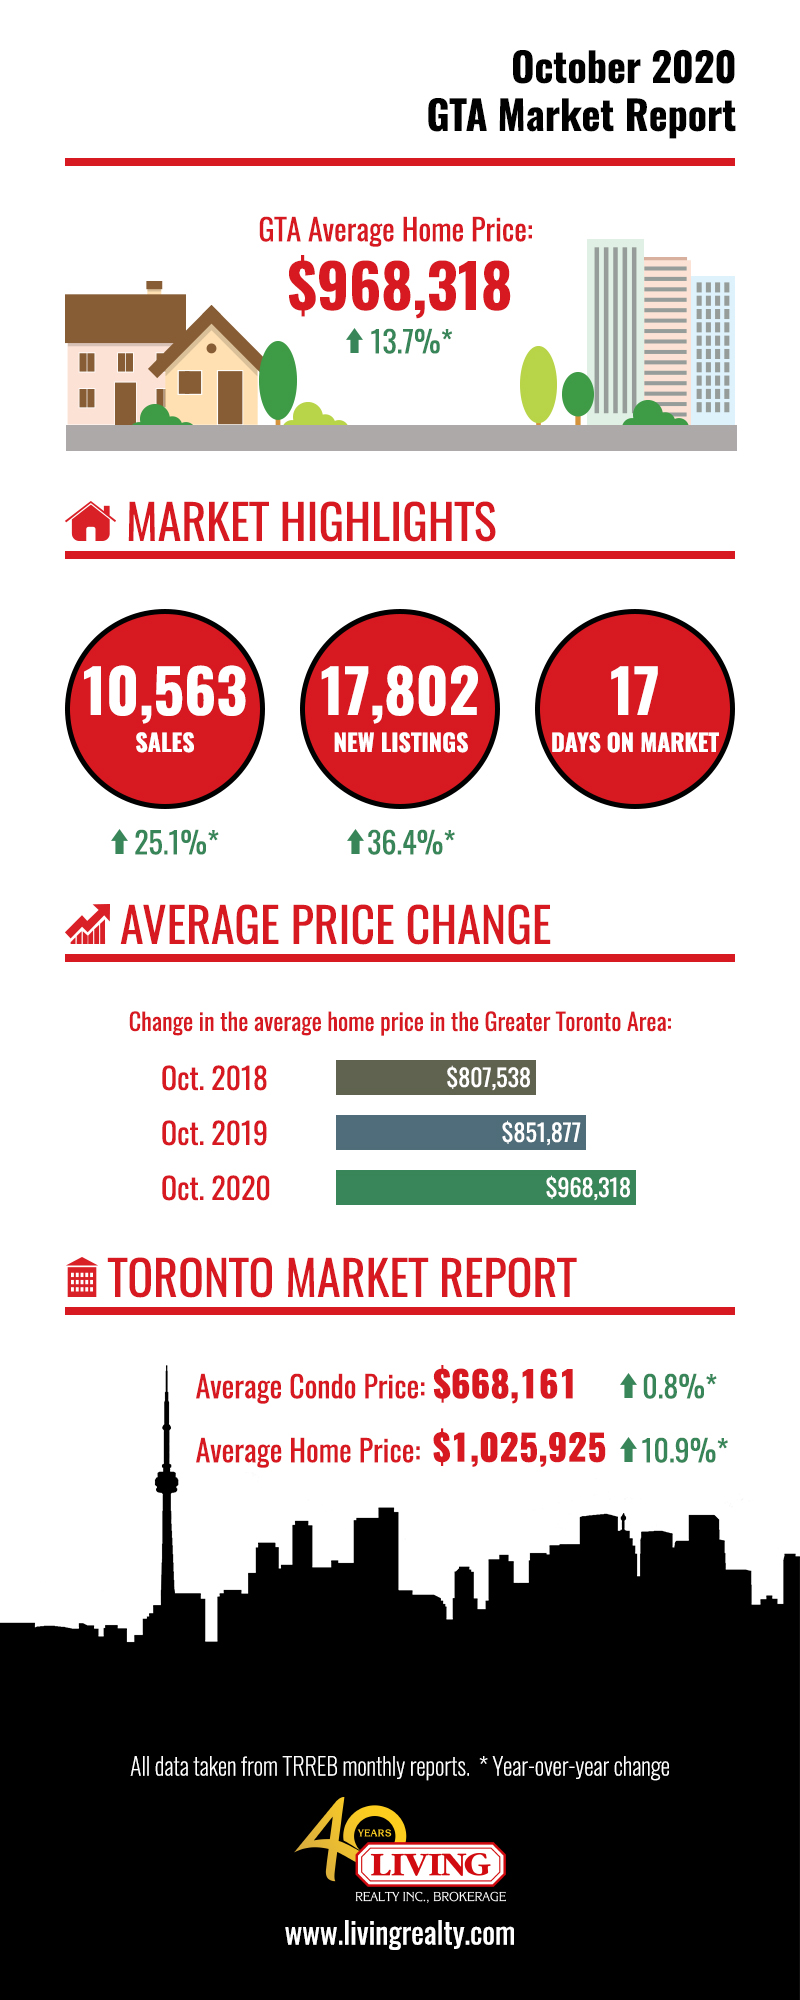 Graph showing October 2020 Housing Market numbers for GTA and Toronto.